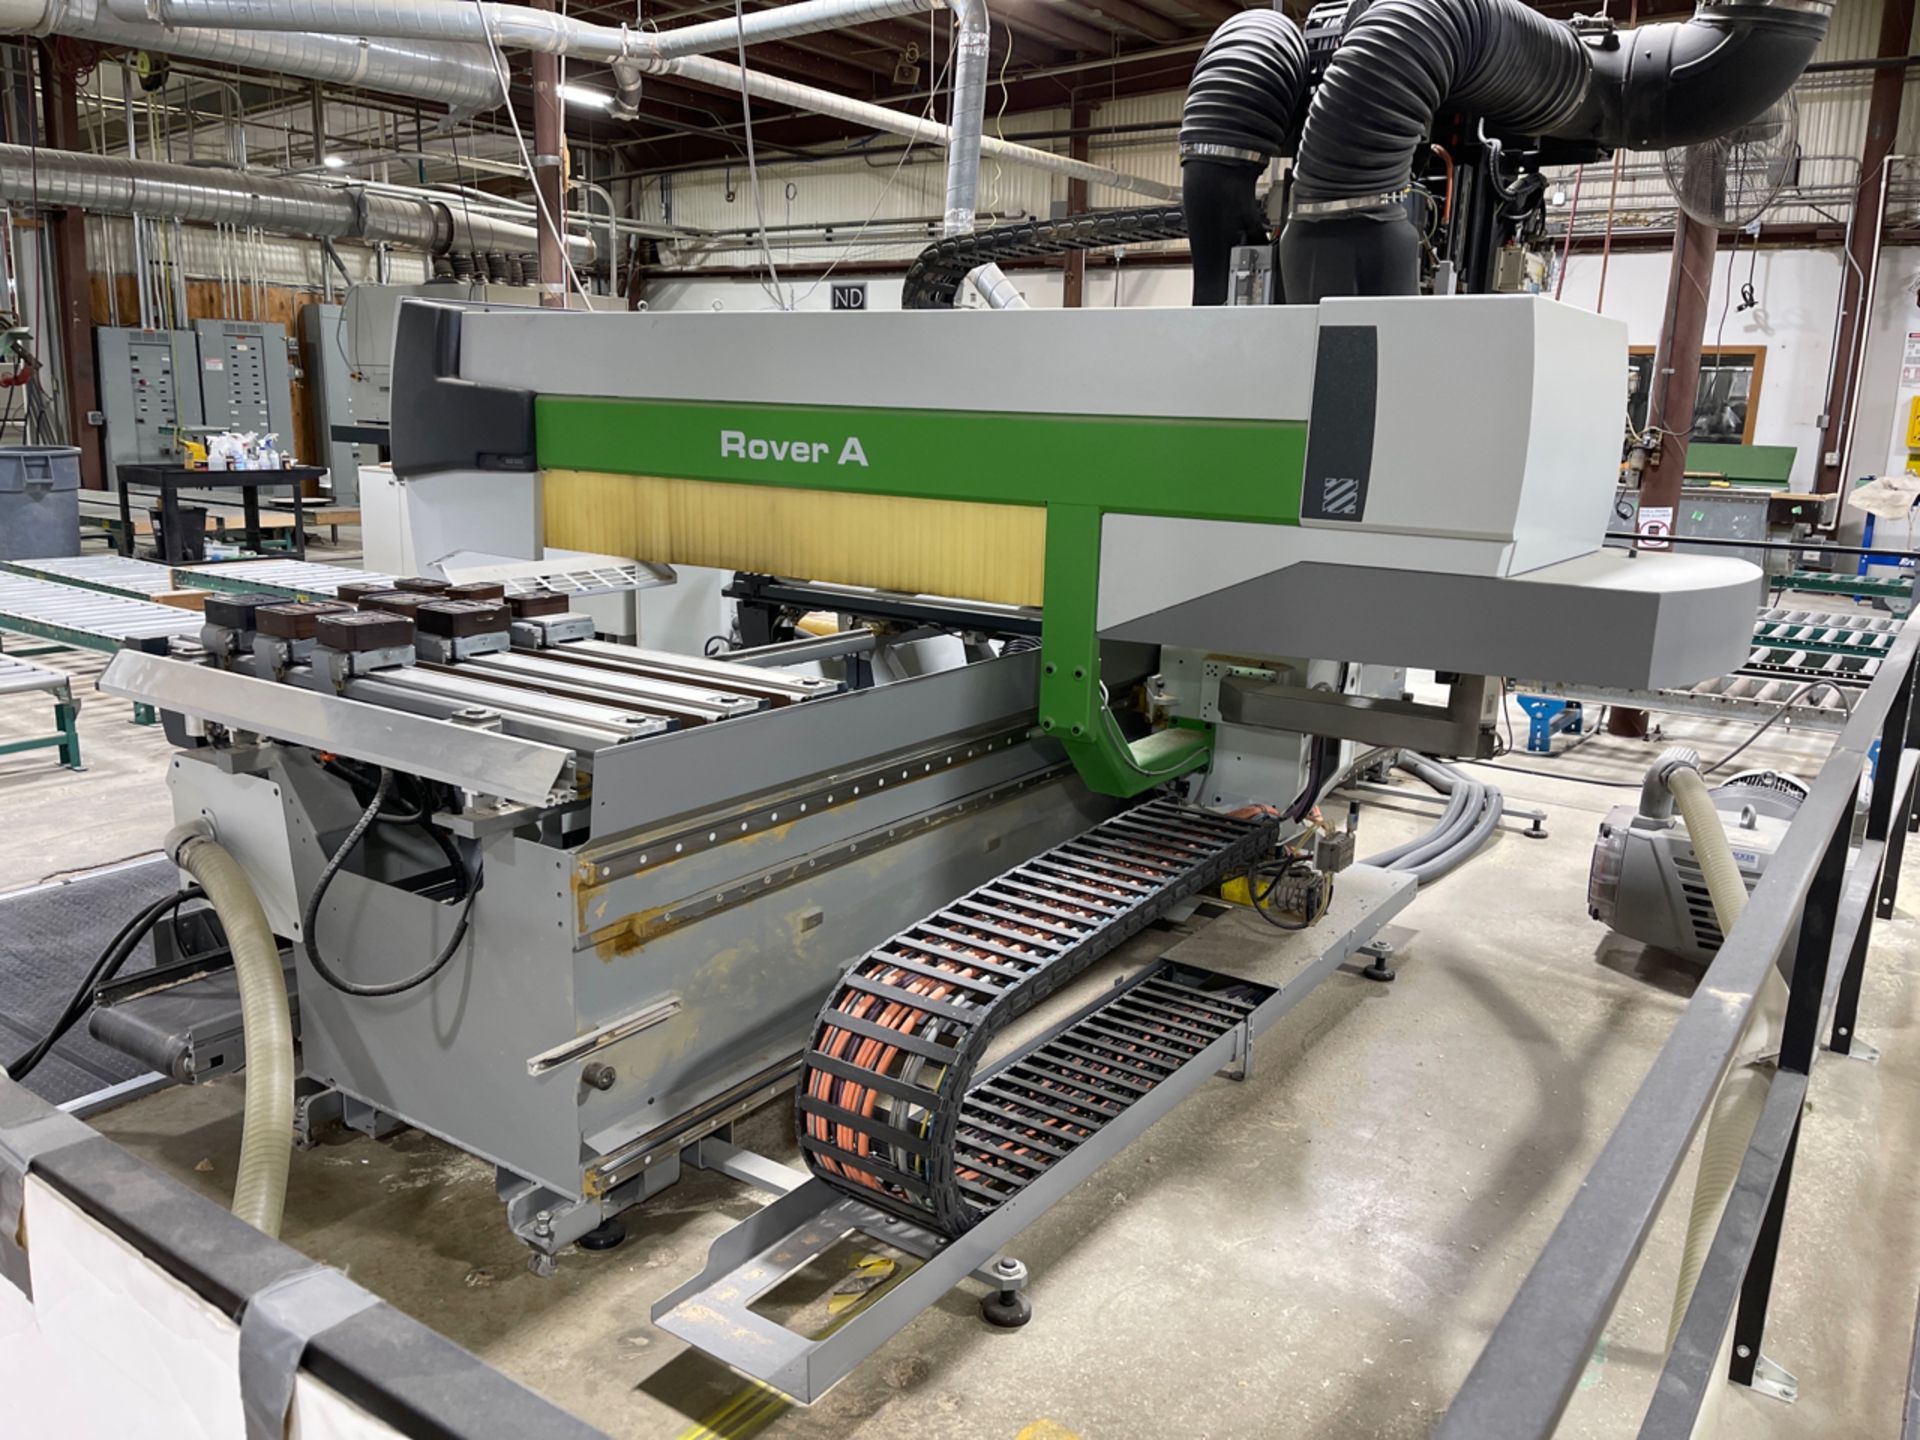 Biesse Rover A 1332 ATS Pod and Rail 4-Axis CNC Router, S/N 35171, New 2012 - Image 3 of 16